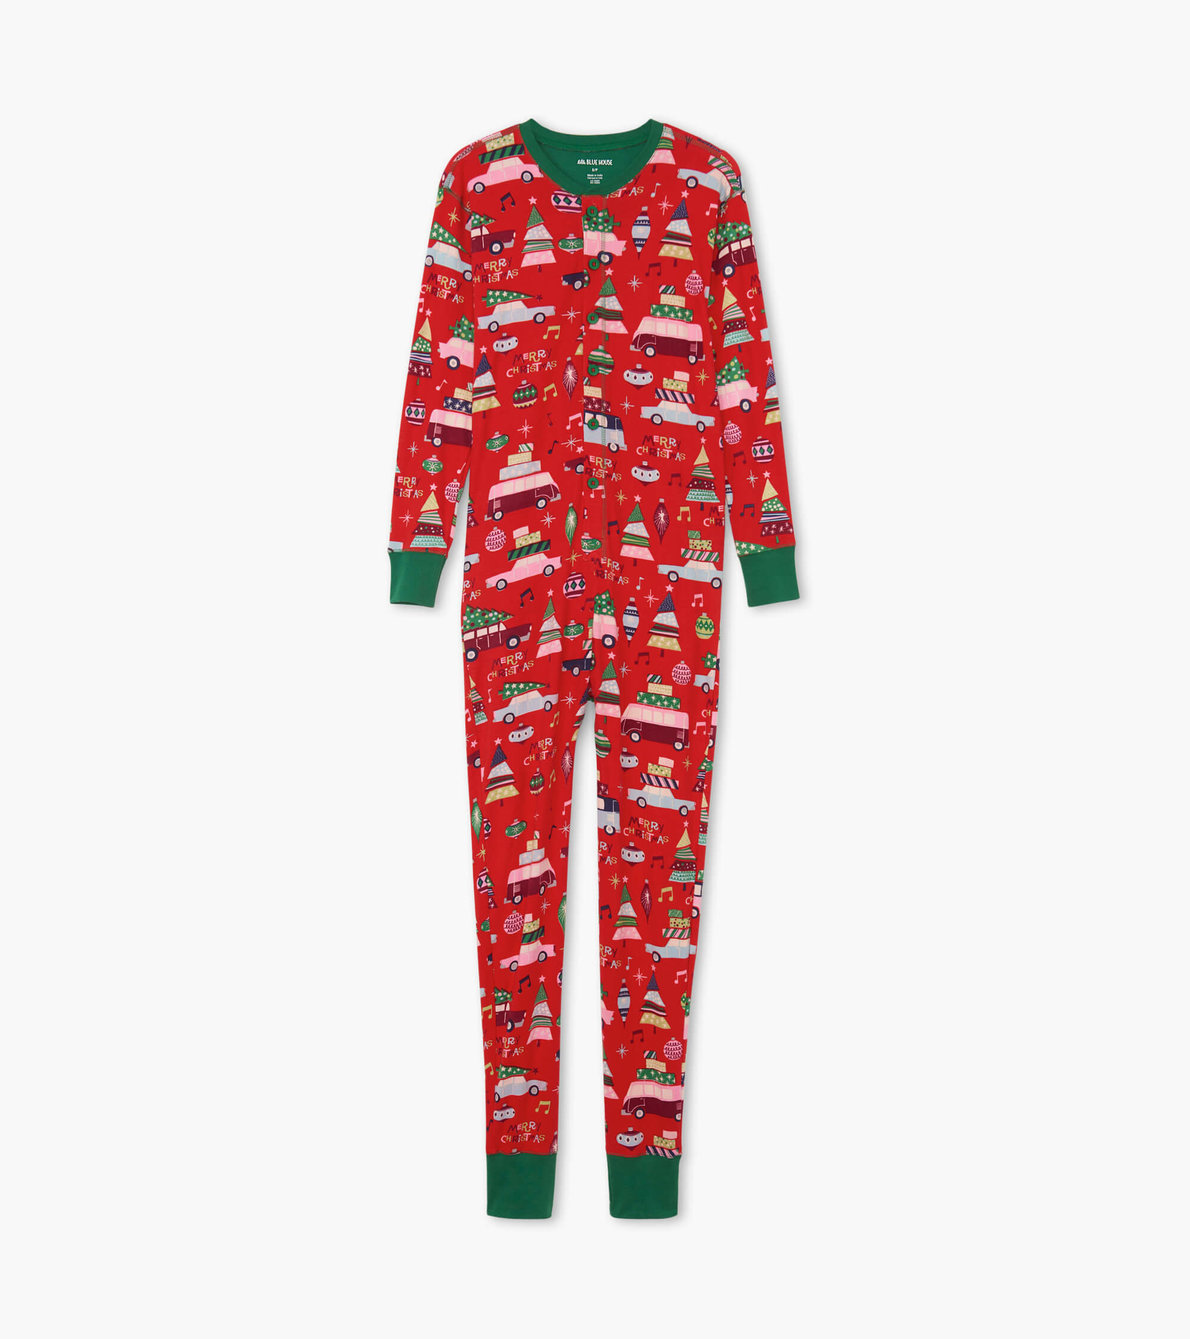 View larger image of Retro Festive Red Adult Union Suit